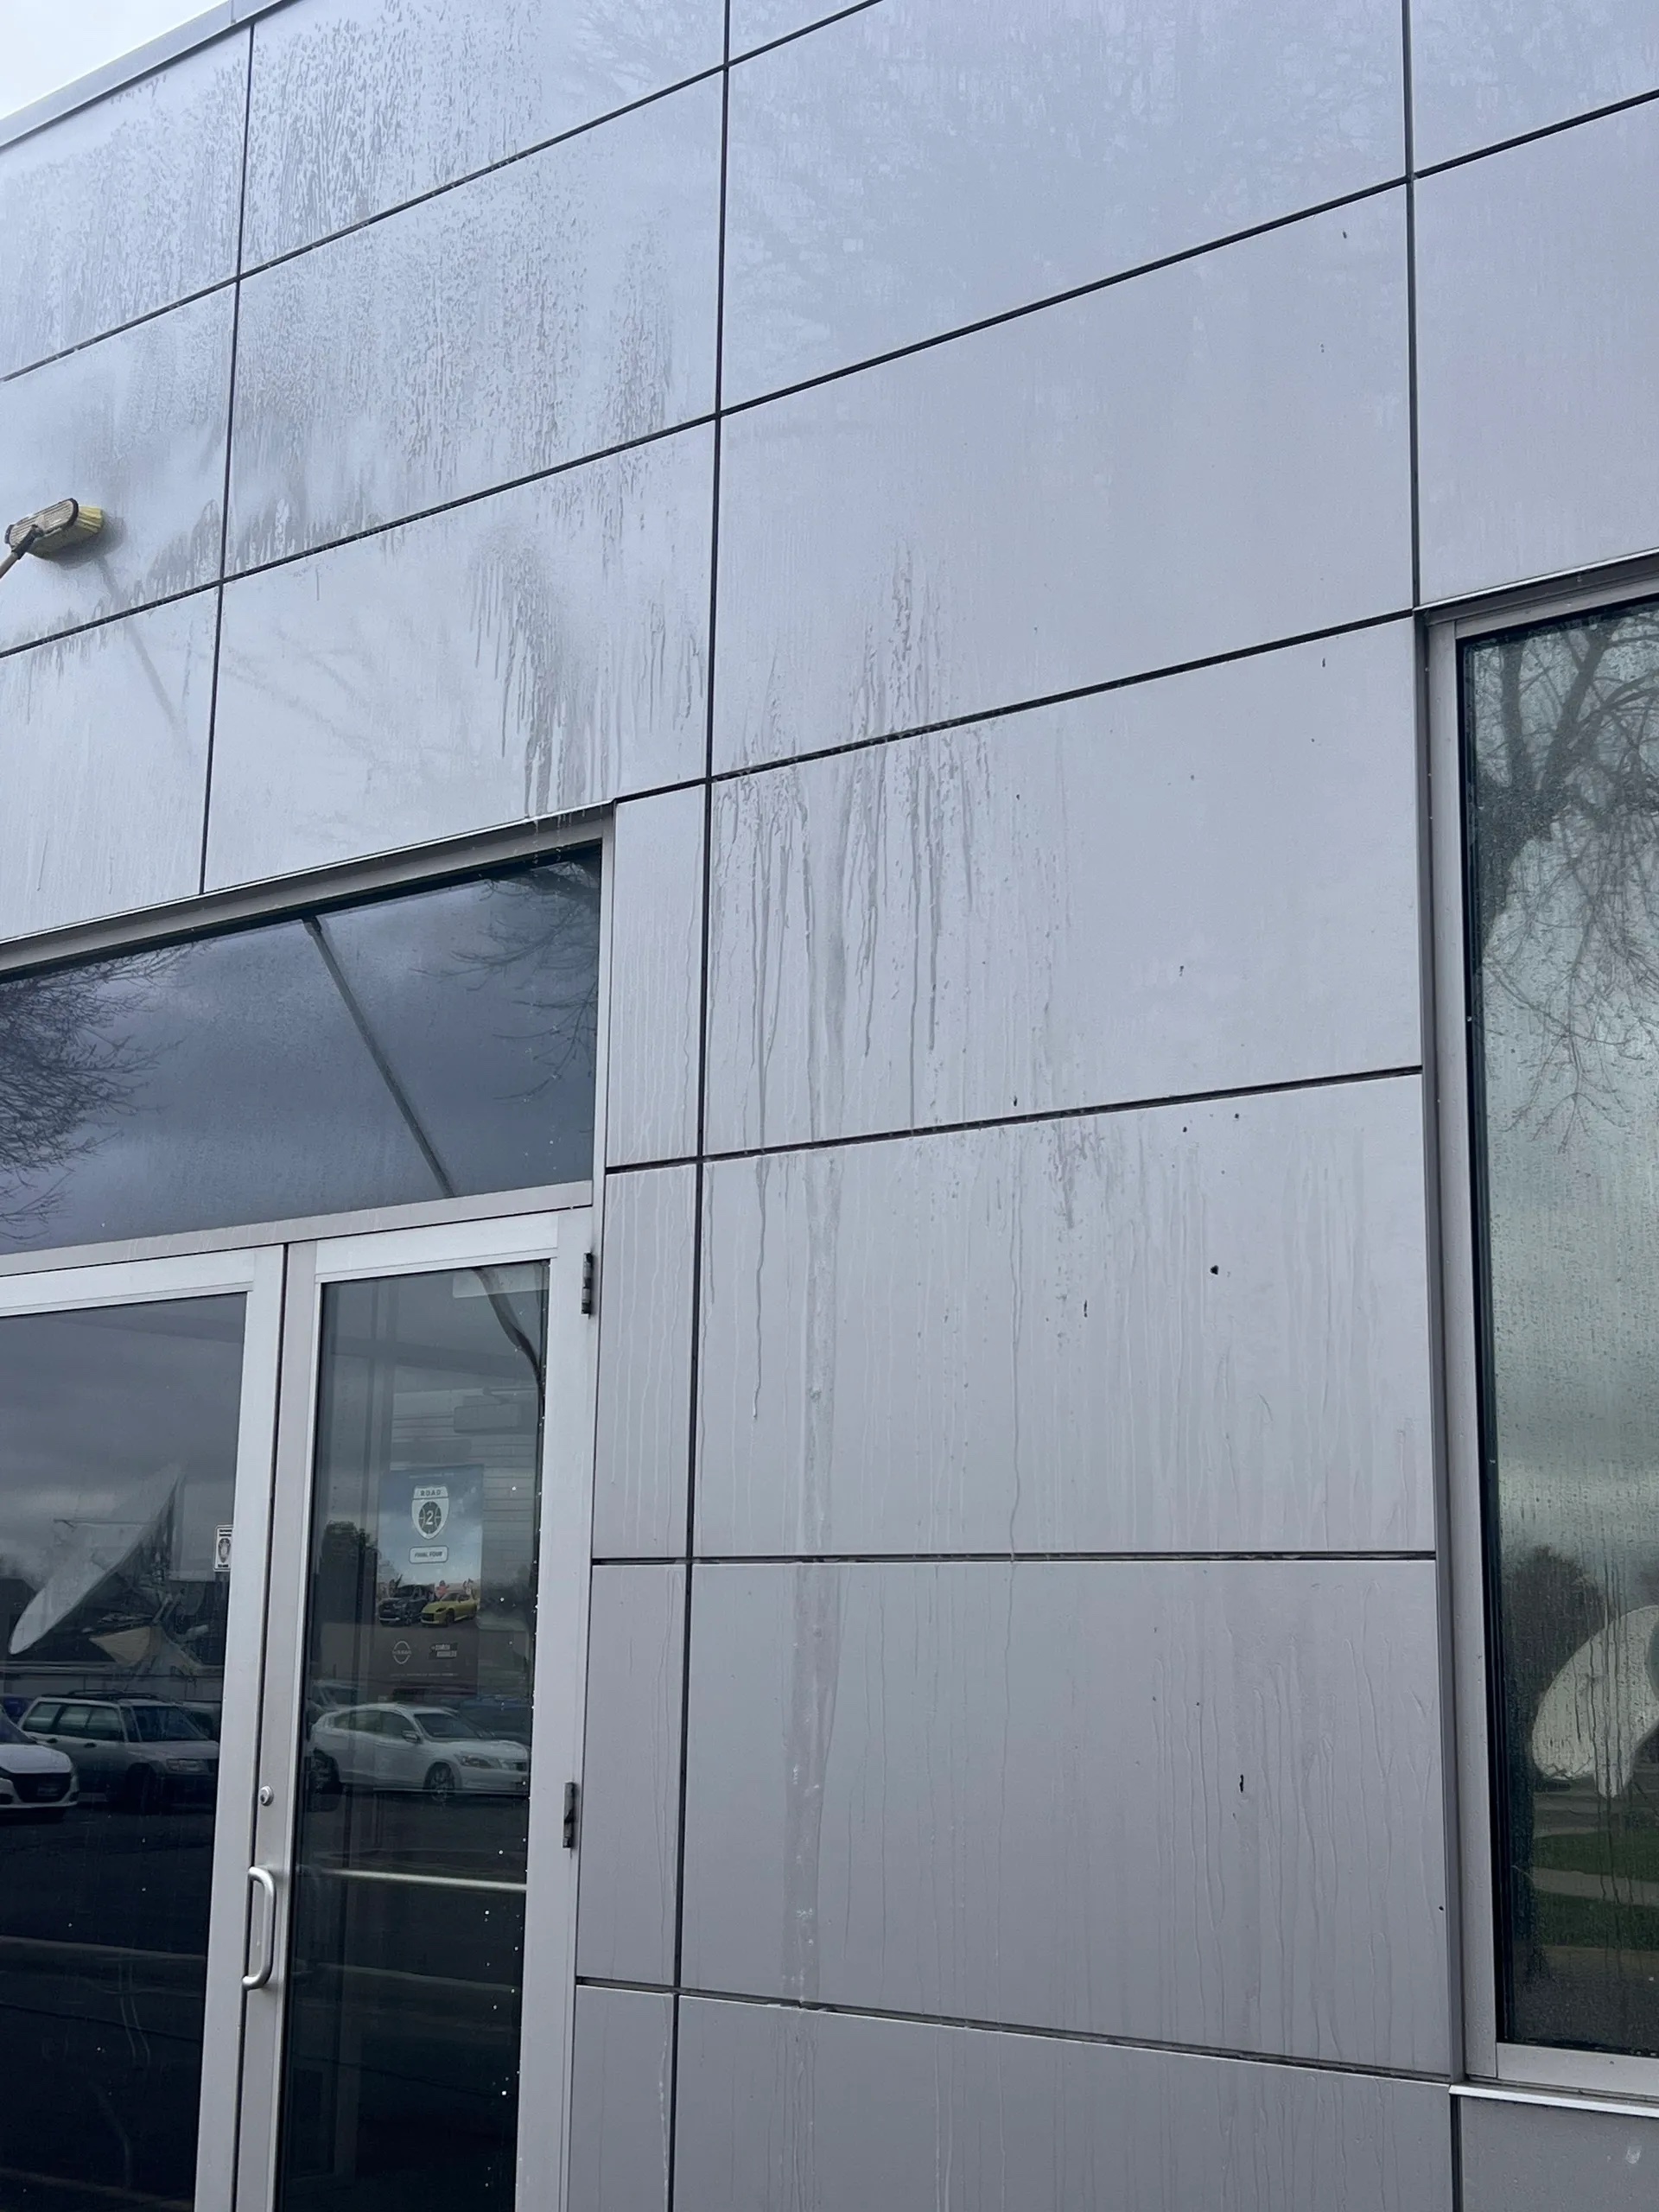 siding of a commercial building being cleaned